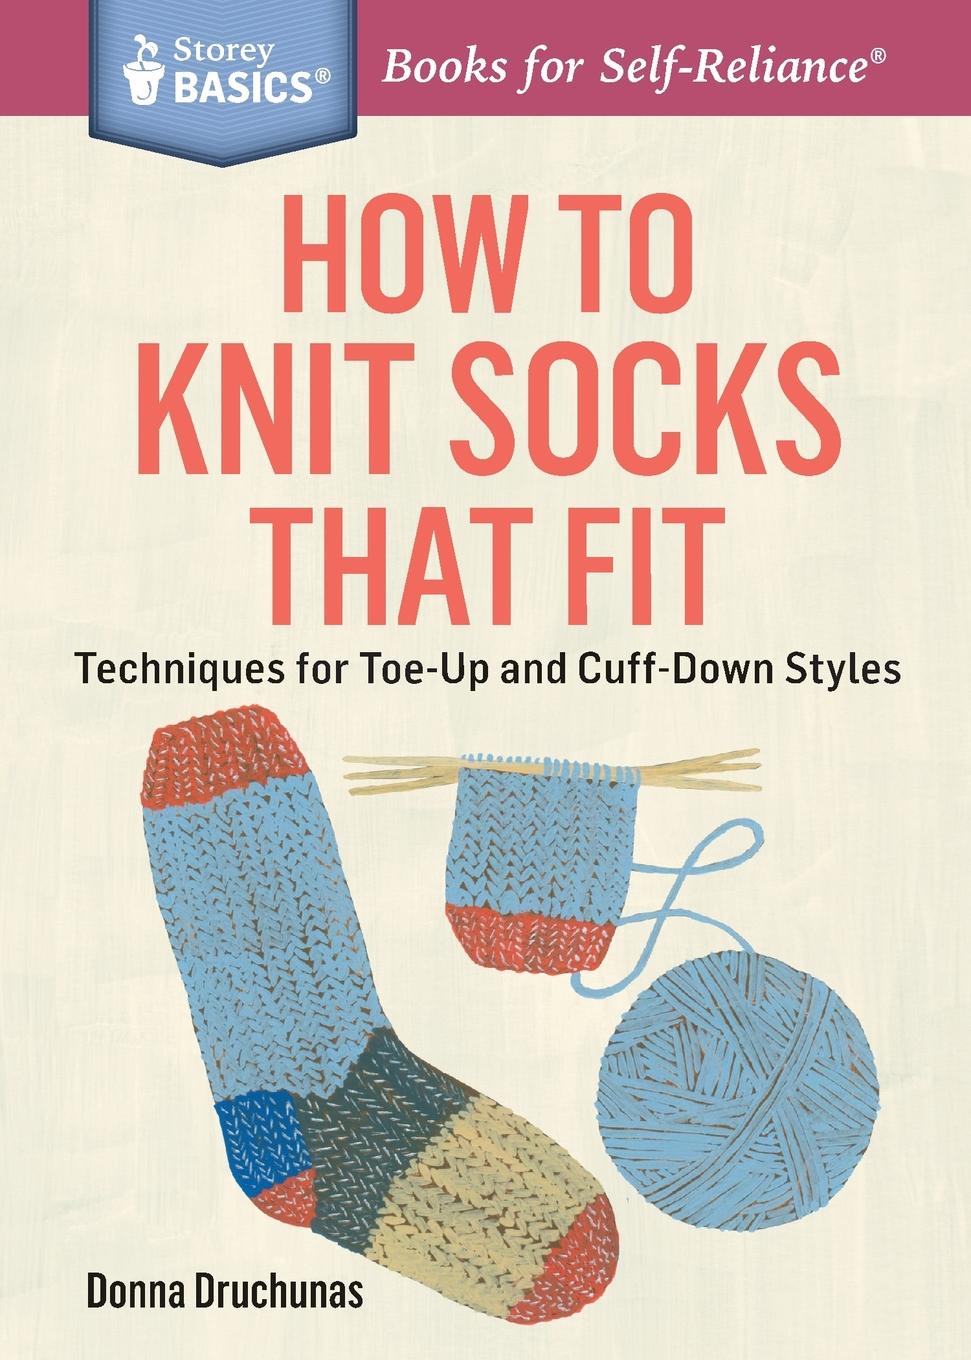 How to Knit Socks That Fit. Techniques for Toe-Up and Cuff-Down Styles. A Storey BASICS. Title